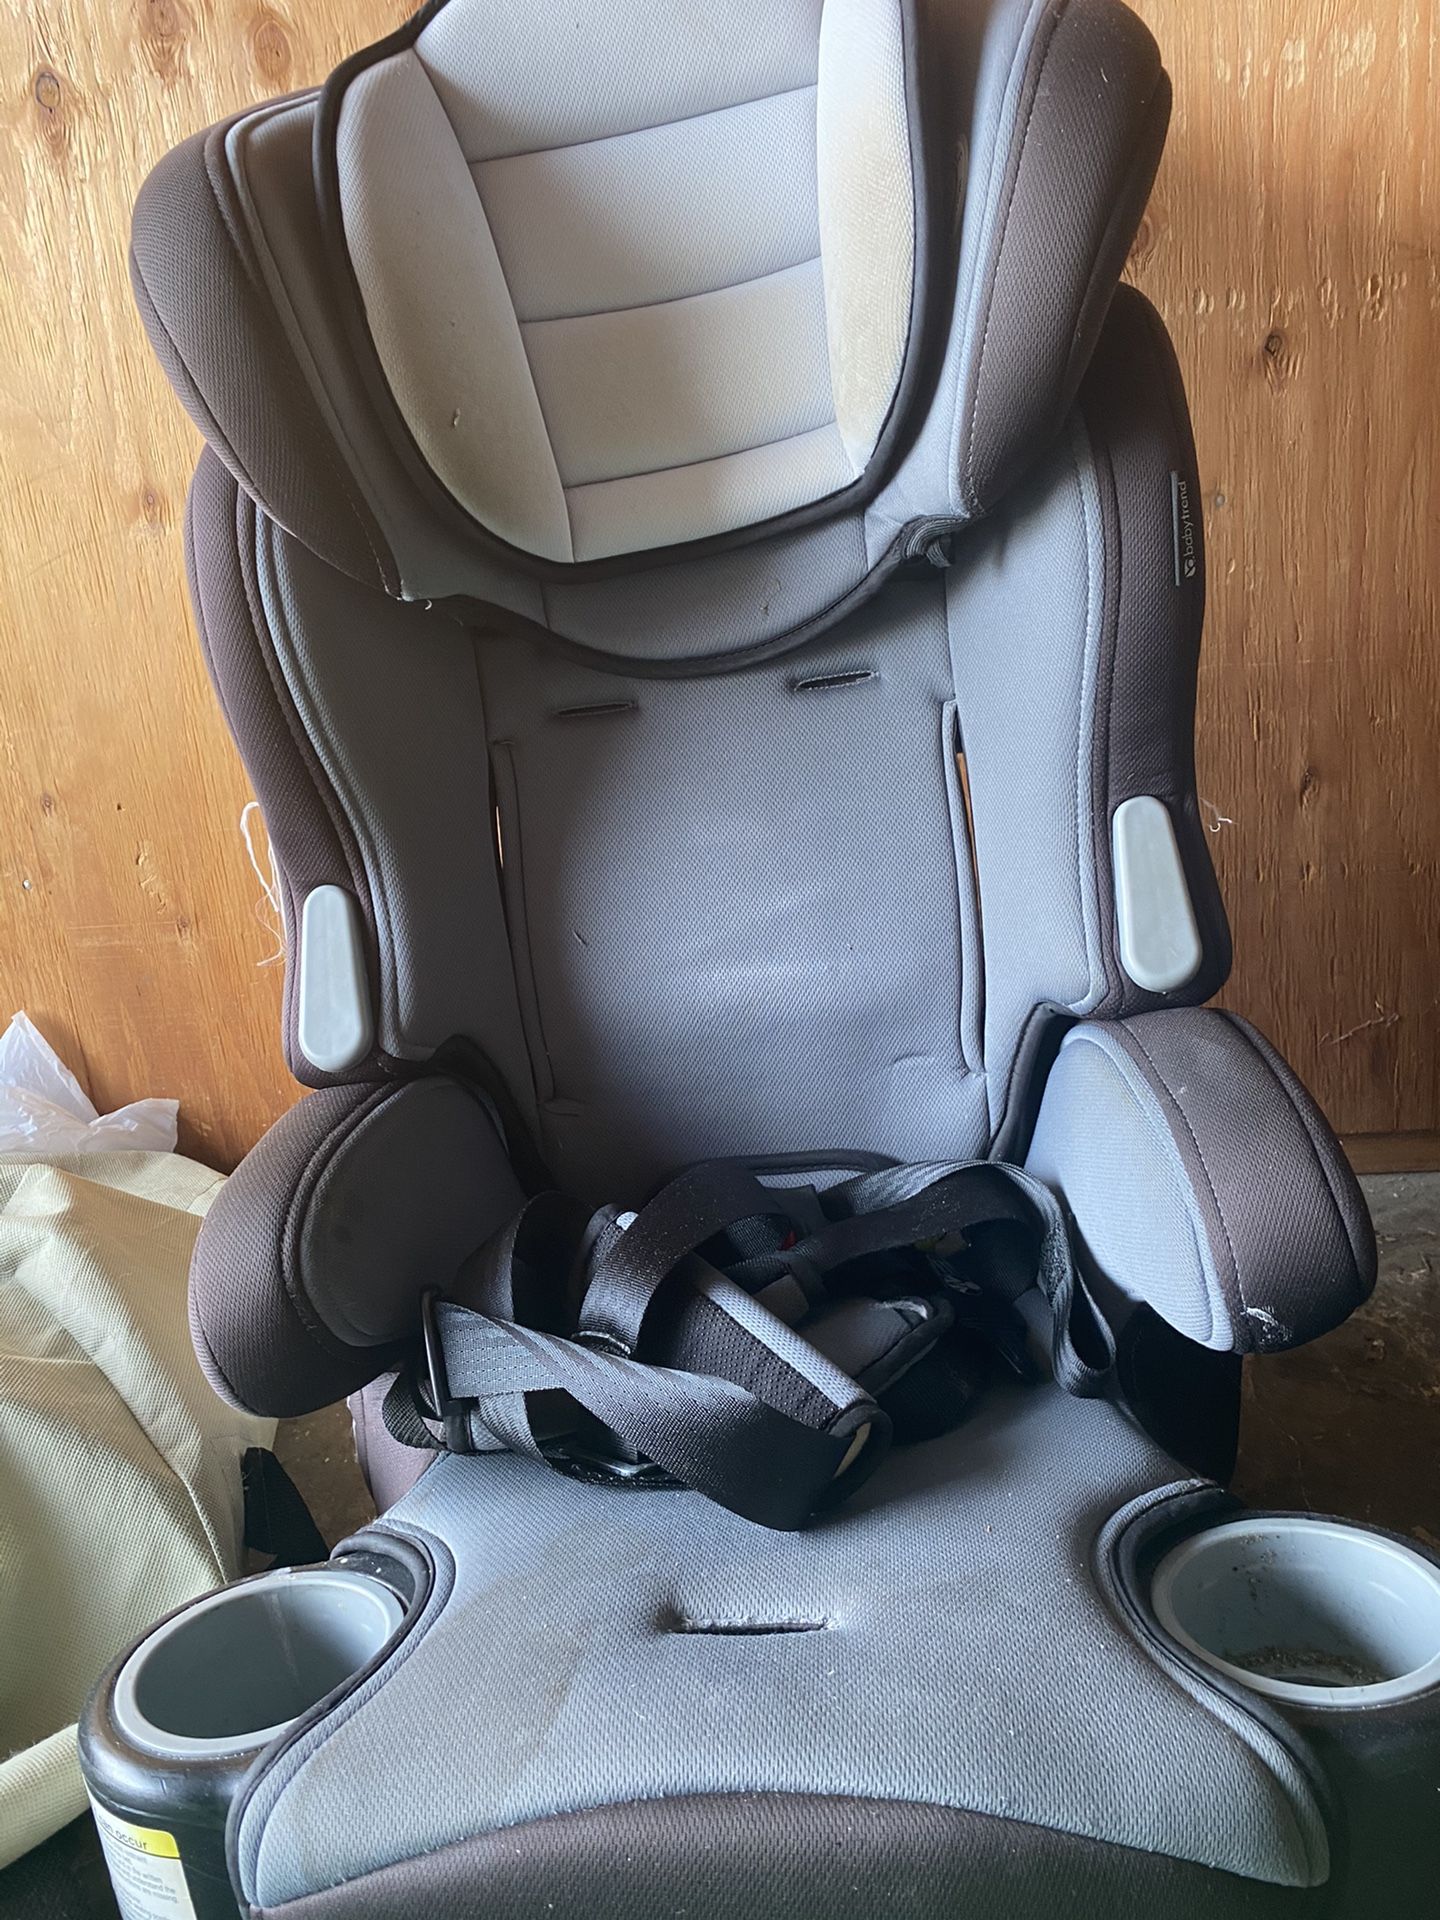 HYbrid baby trend 3 in 1 car seat